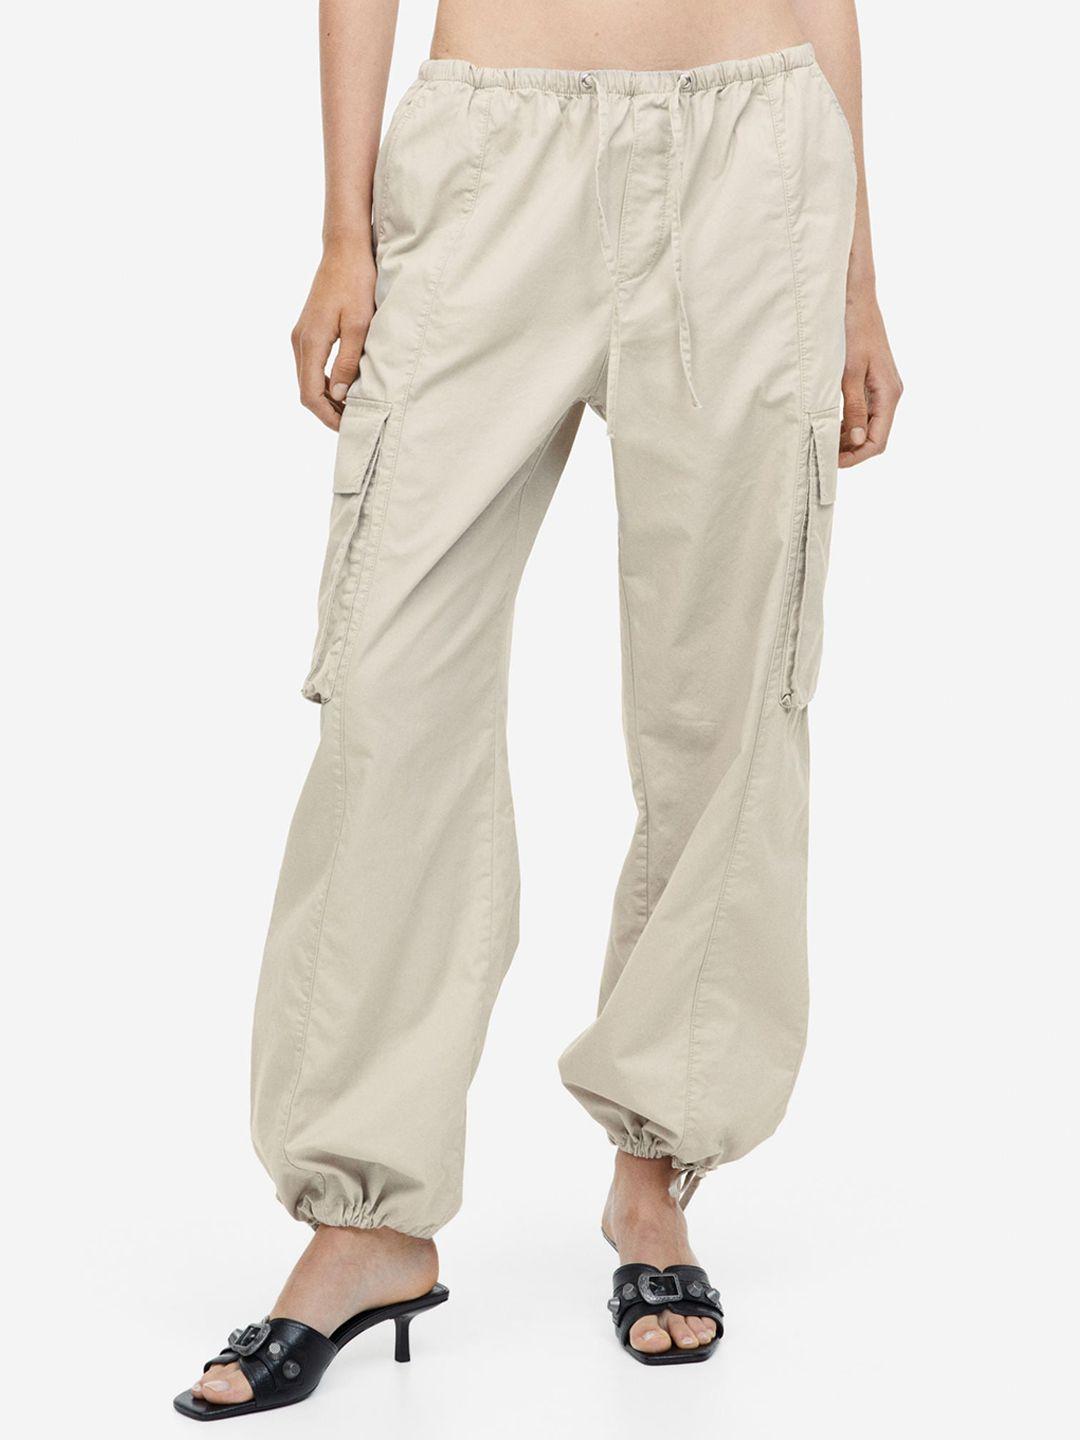 h&m cargo trousers